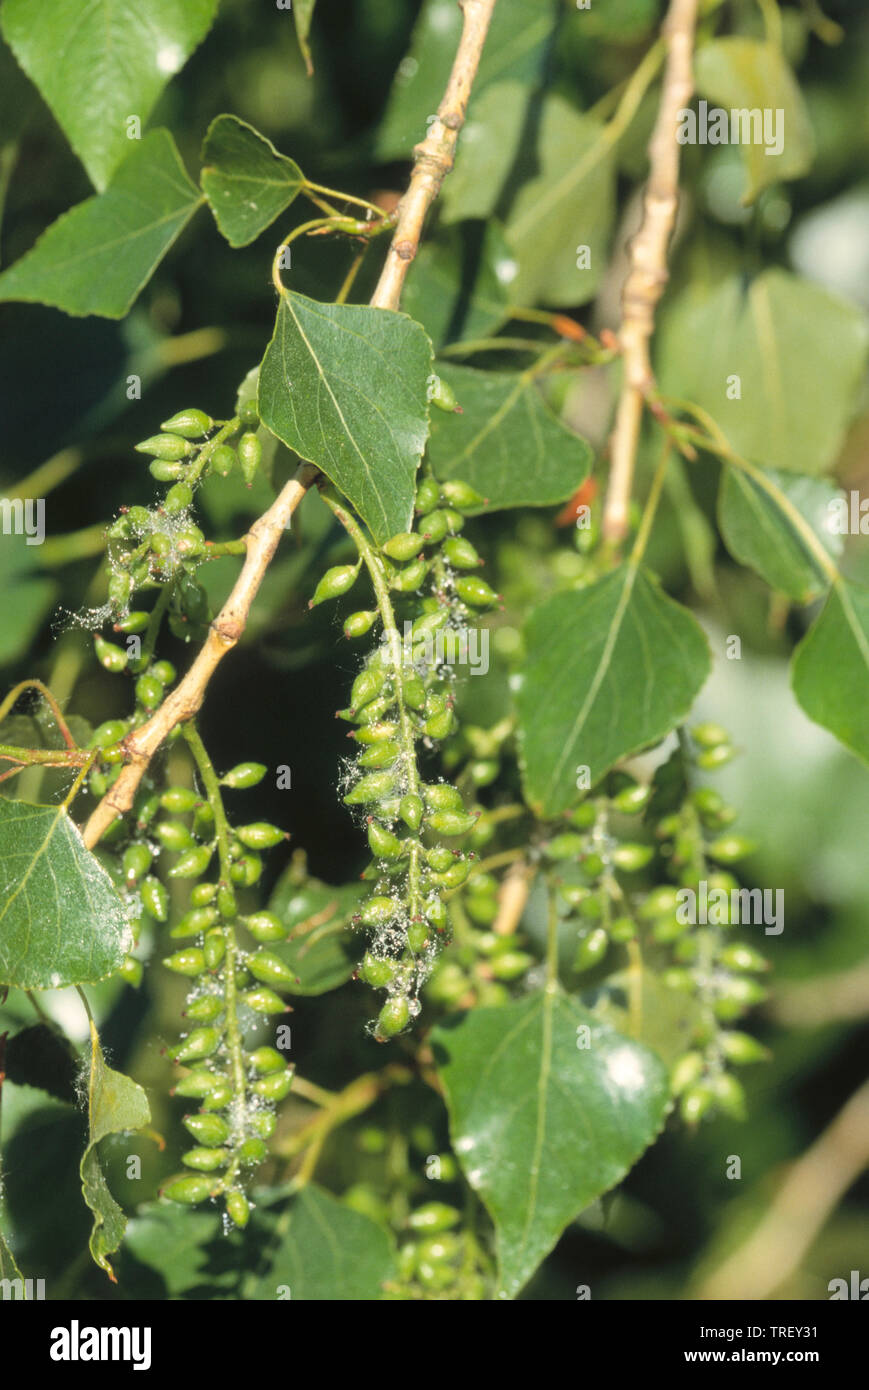 Black Poplar (Populus nigra). Twigs with leaves and fruit stands. Germany Stock Photo